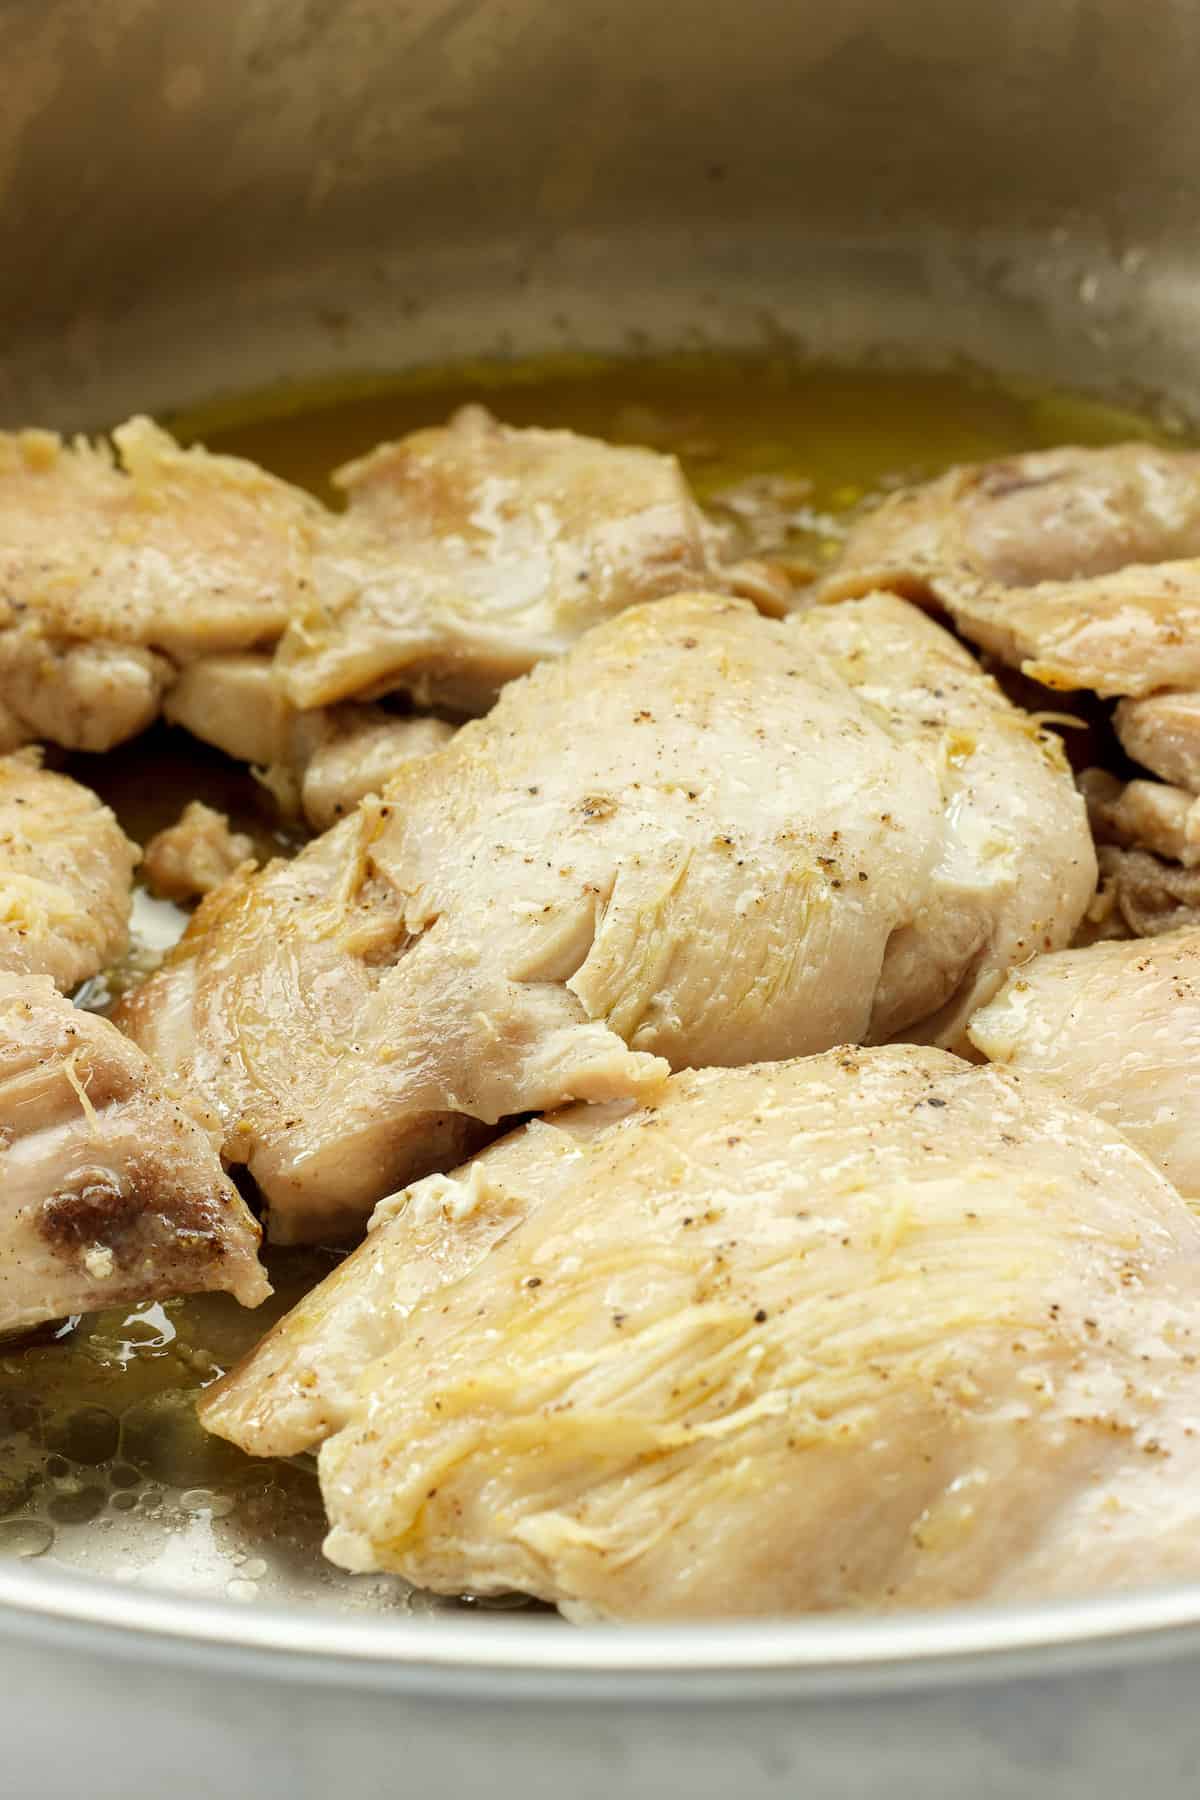 Chicken pieces browning in saute pan.